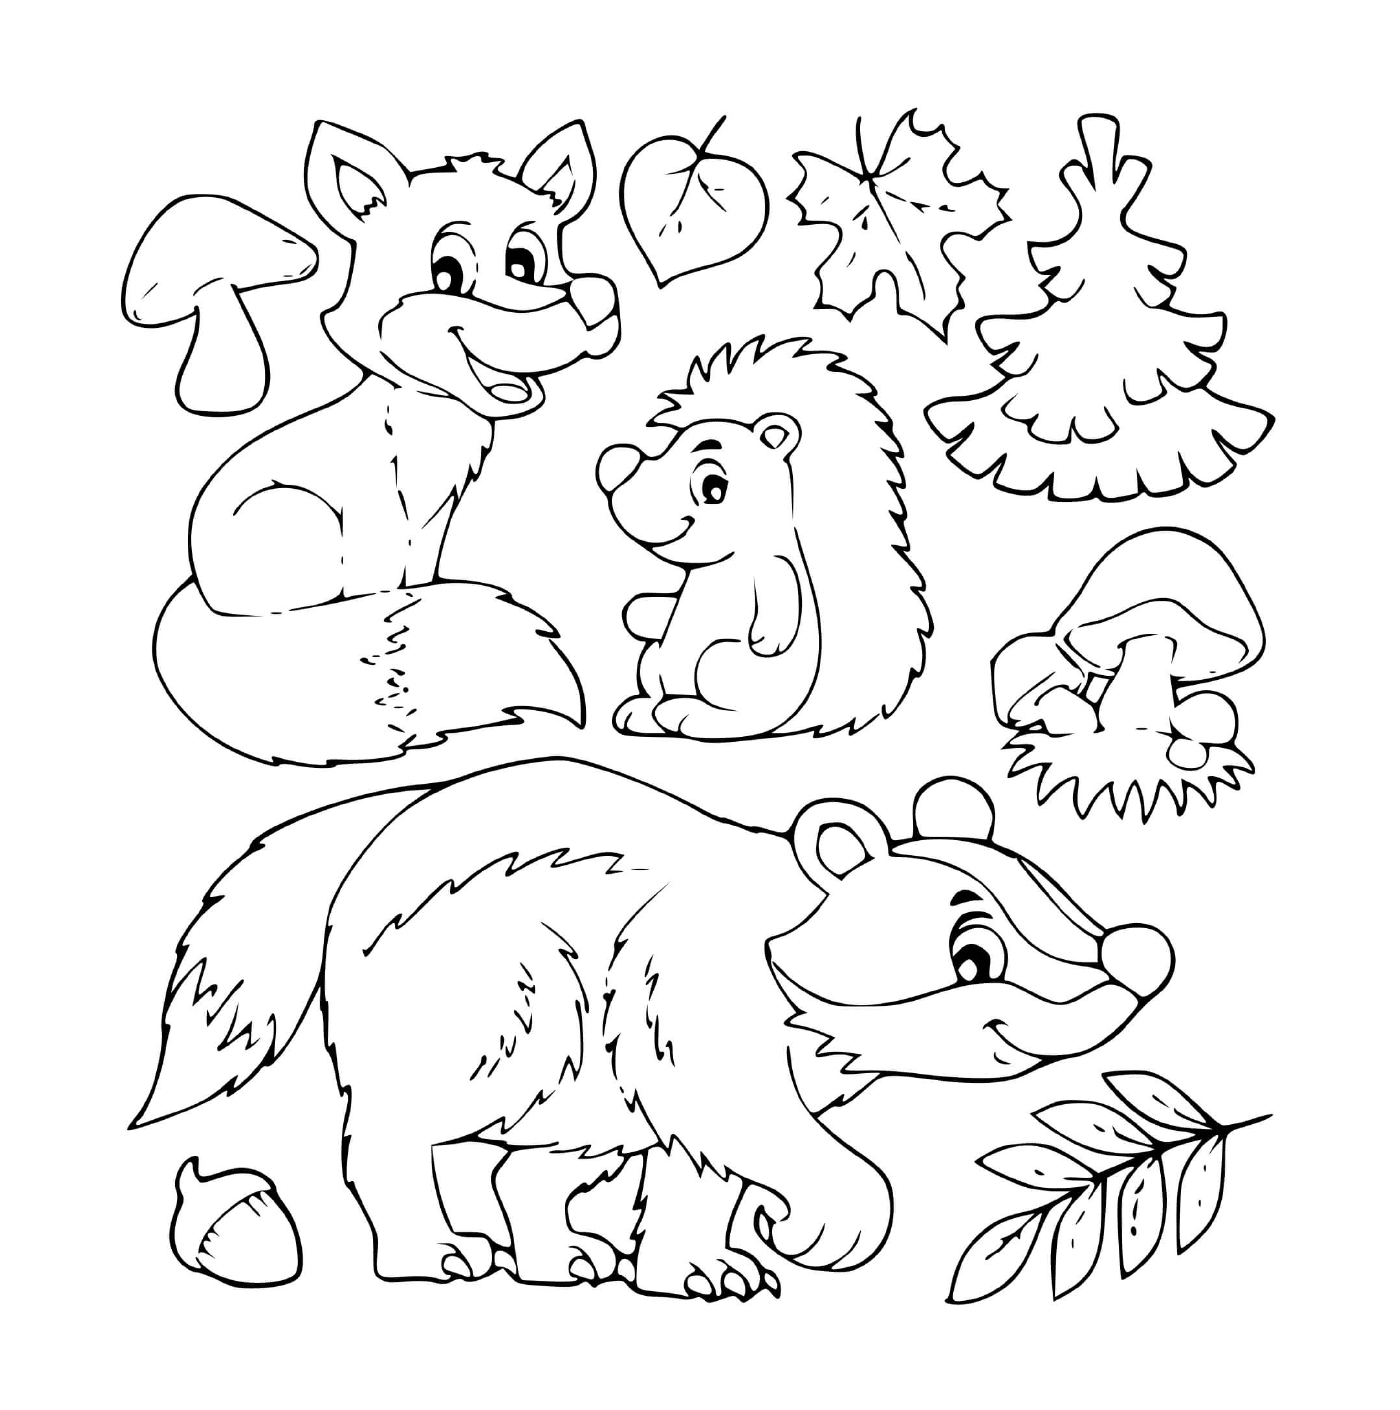  A set of animals and leaves 